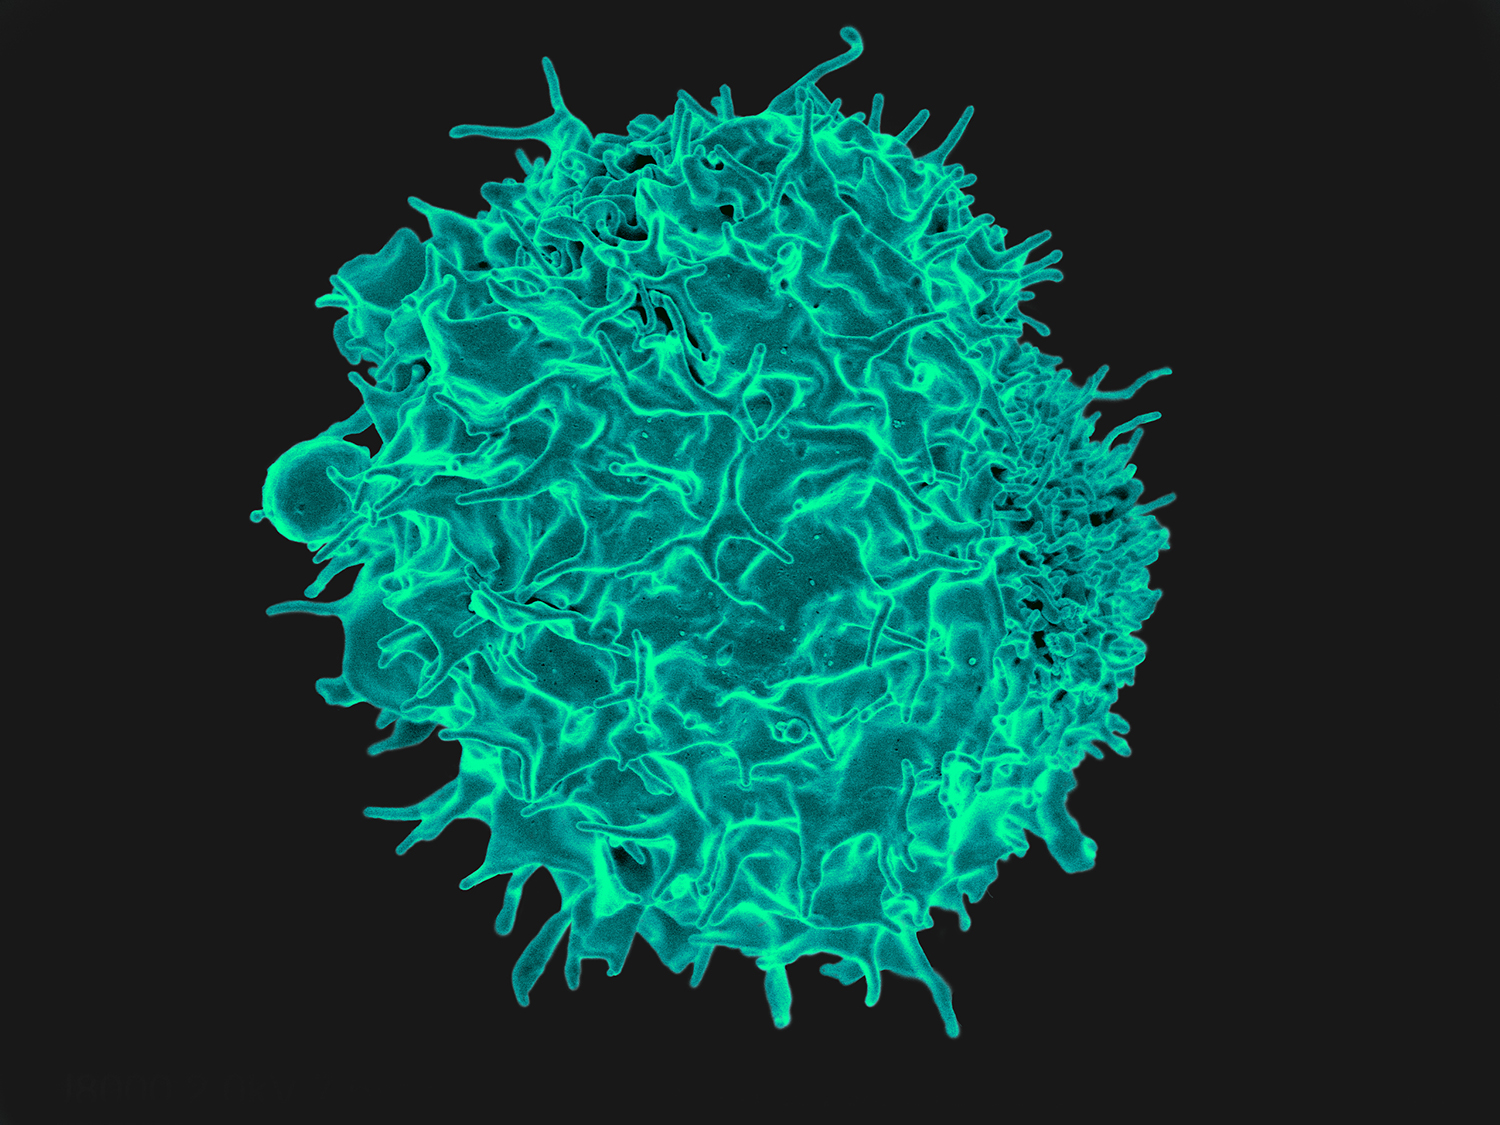 Colorized scanning electron micrograph of a T cell.